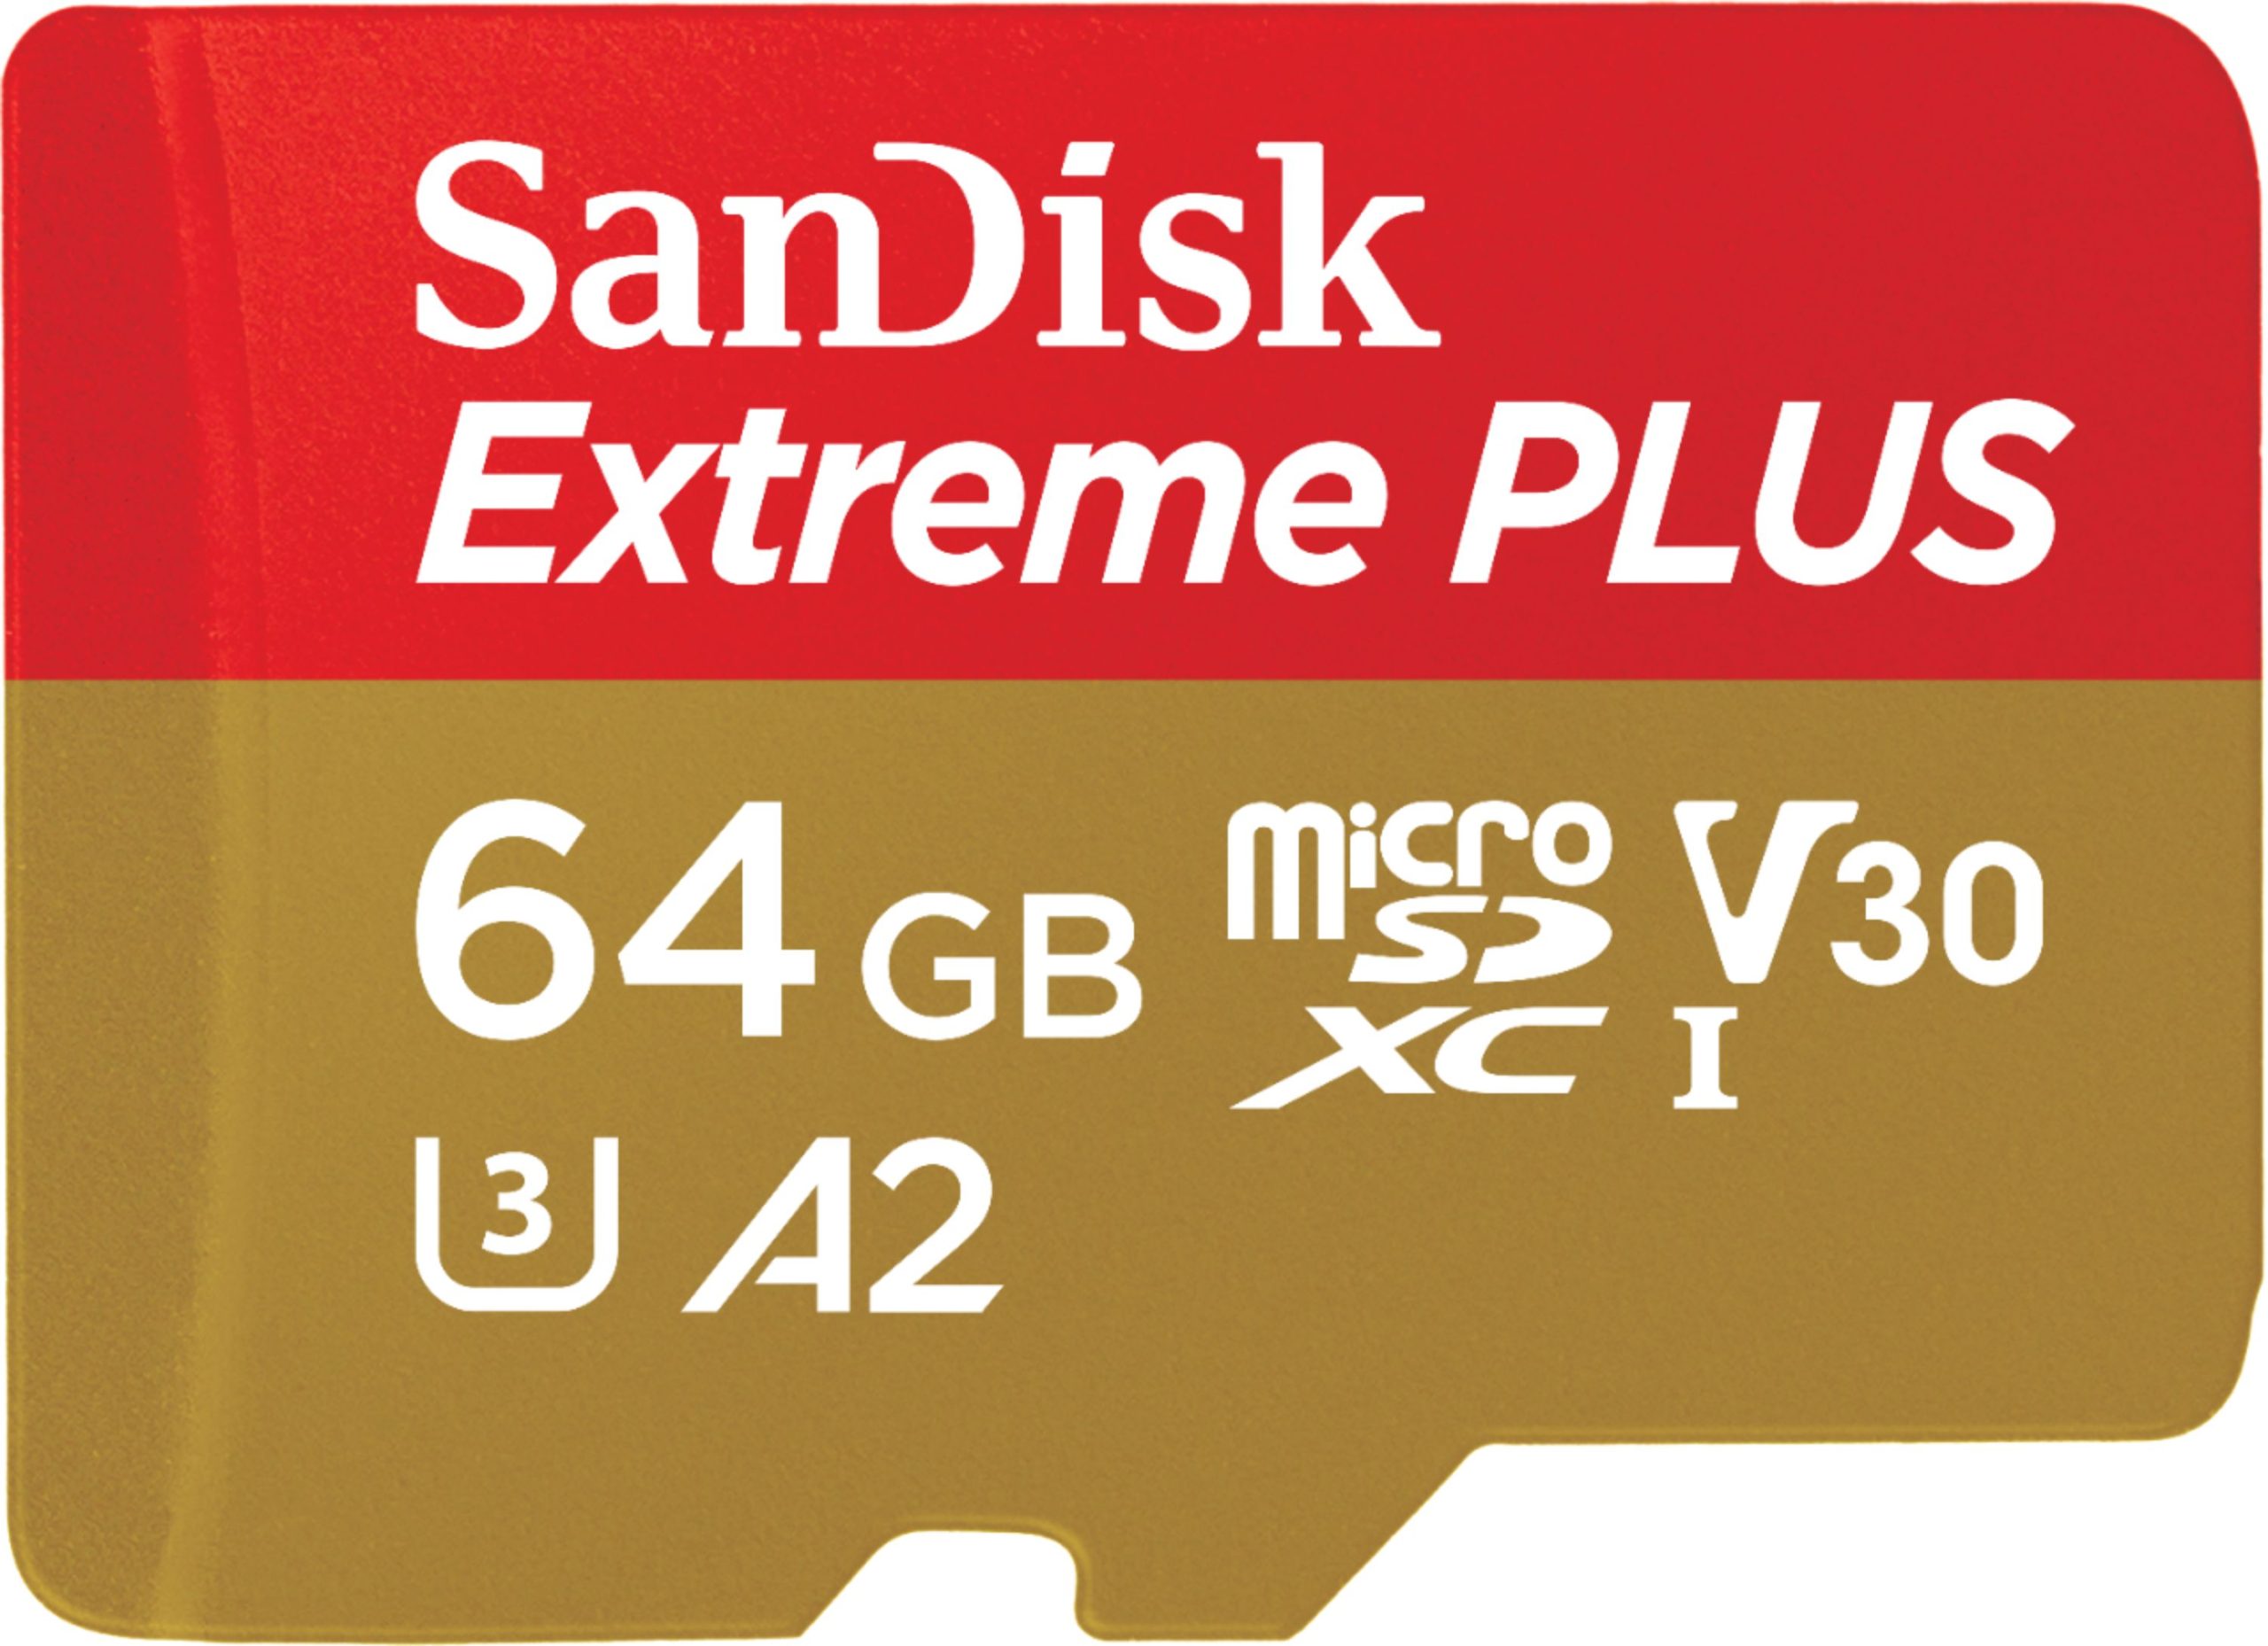 SanDisk – Extreme PLUS 64GB microSDXC UHS-I Memory Card – Just $22.99 at Best Buy